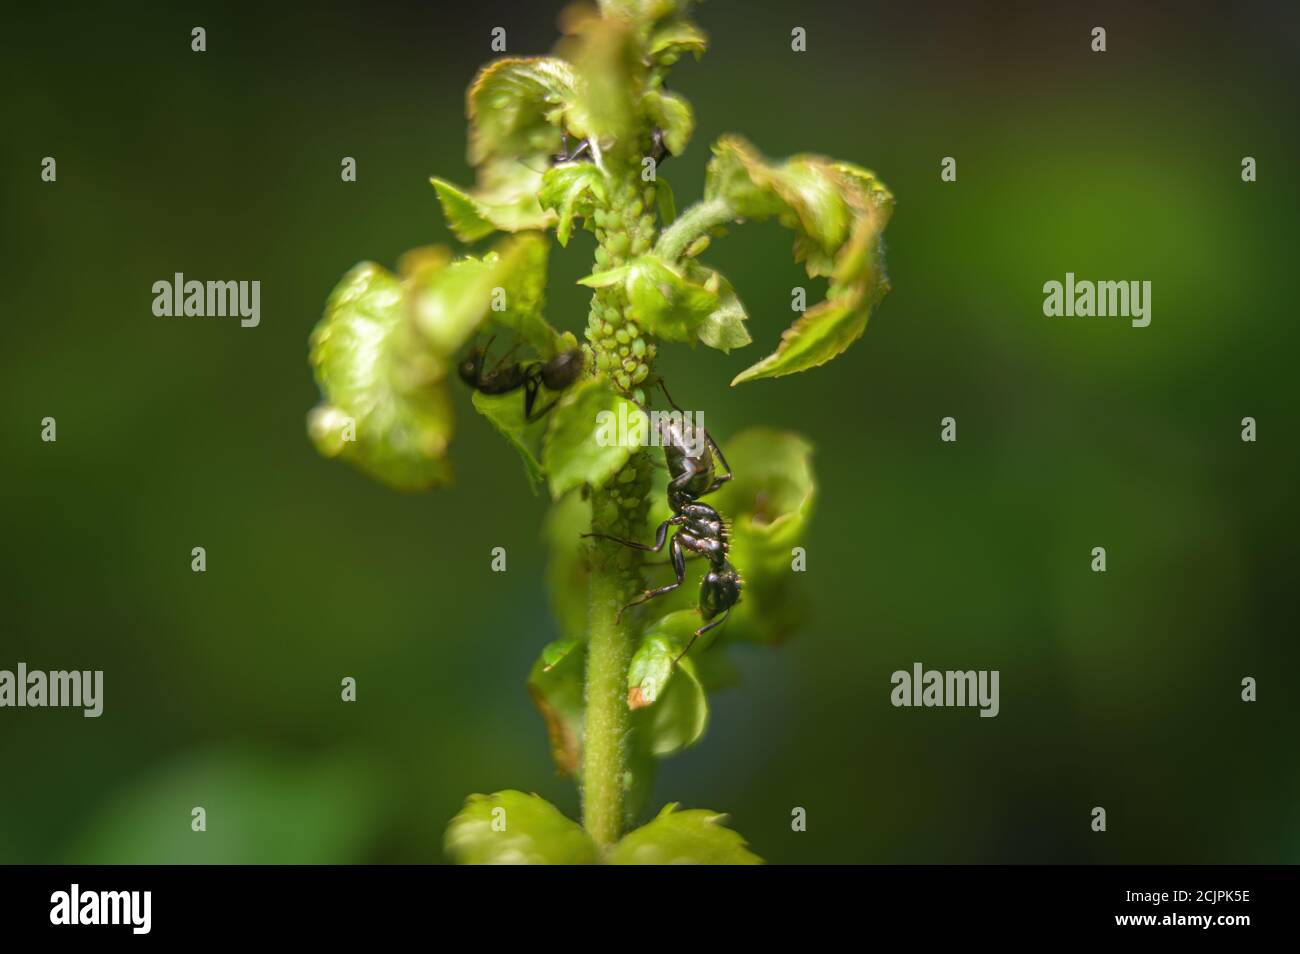 An ant crawling down the stem of a green leafy garden plant Stock Photo